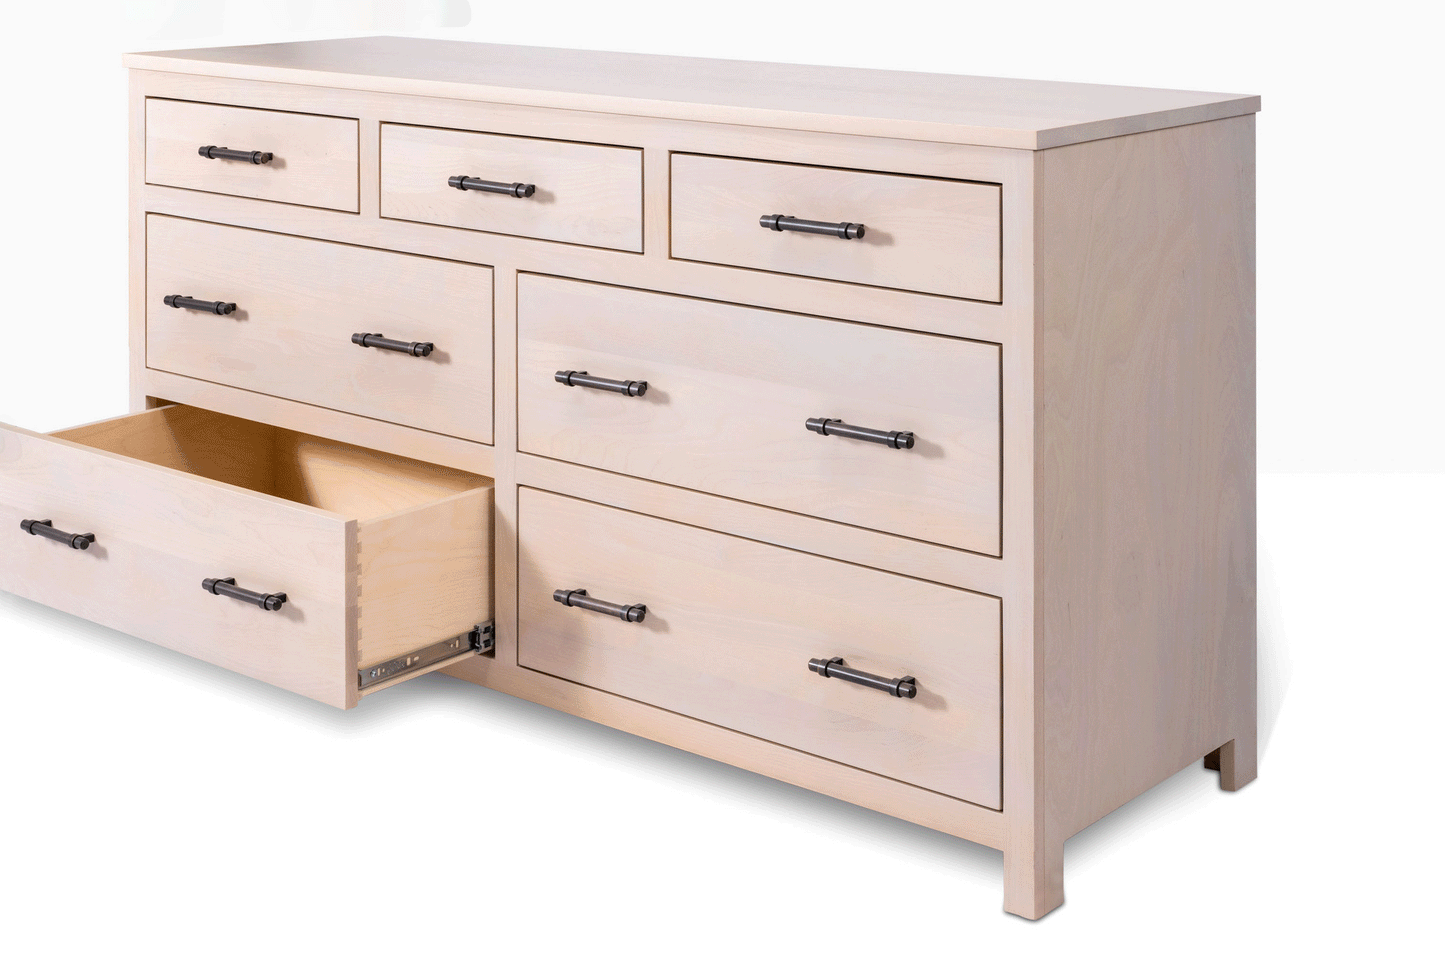 Acadia Tremont Seven Drawer Dresser features four large drawers and three small drawers on the top row. Pictured in Sandstone Finish with drawer open to show storage space.